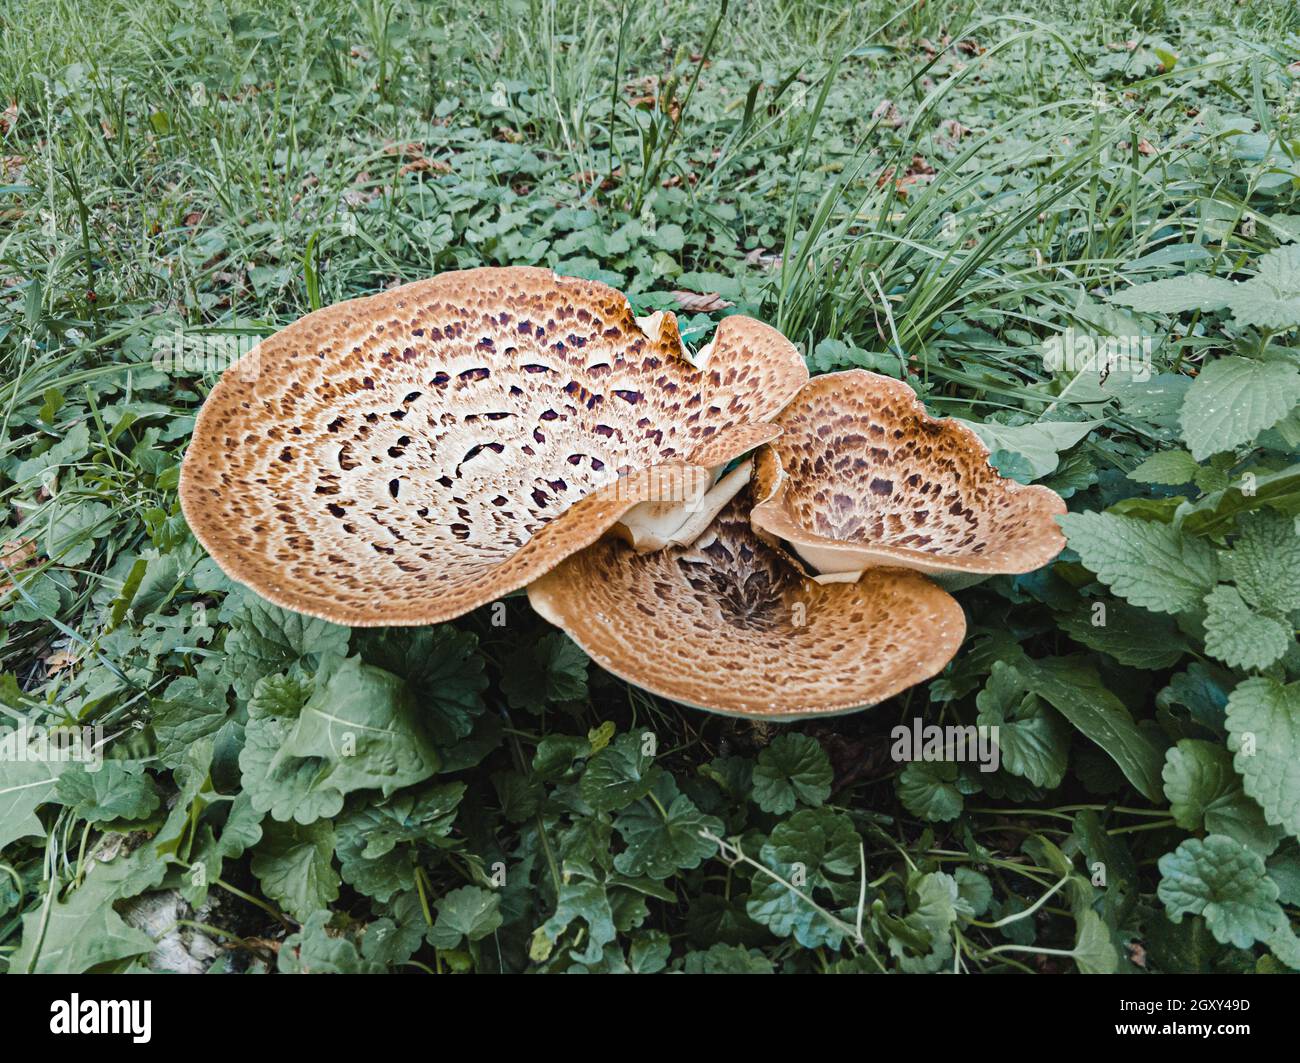 A Cerioporus squamosus mushroom, also known as dryad's saddle and pheasant's back mushroom is growing in the meadow Stock Photo